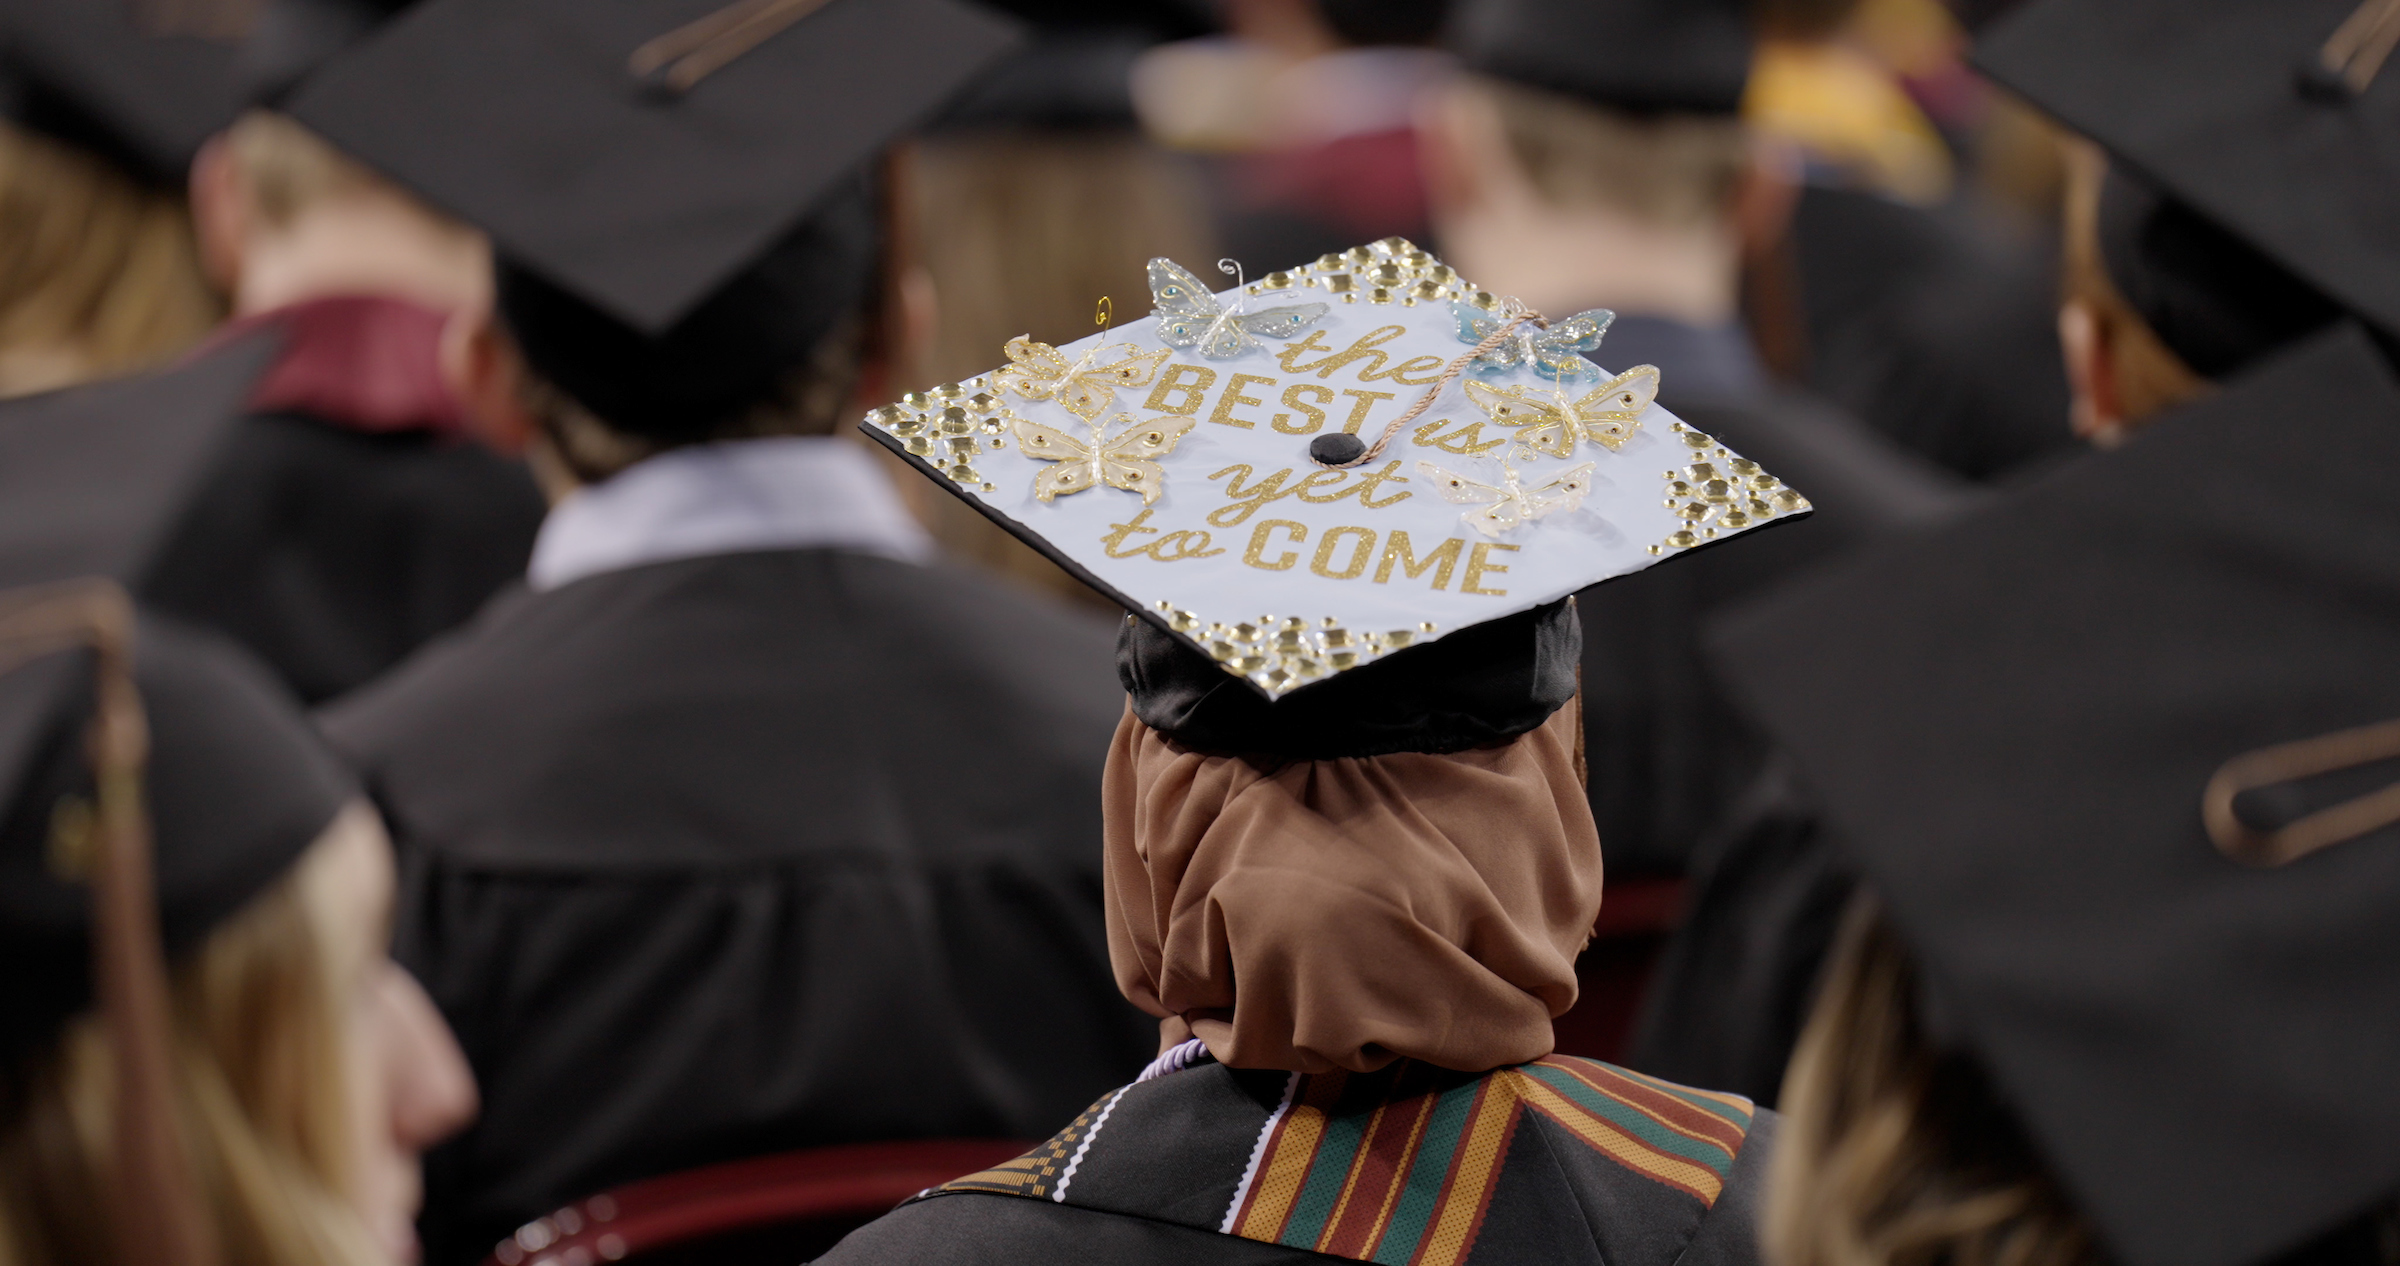 Group of graduates with a decorated cap reading, "The best is yet to come." in focus.